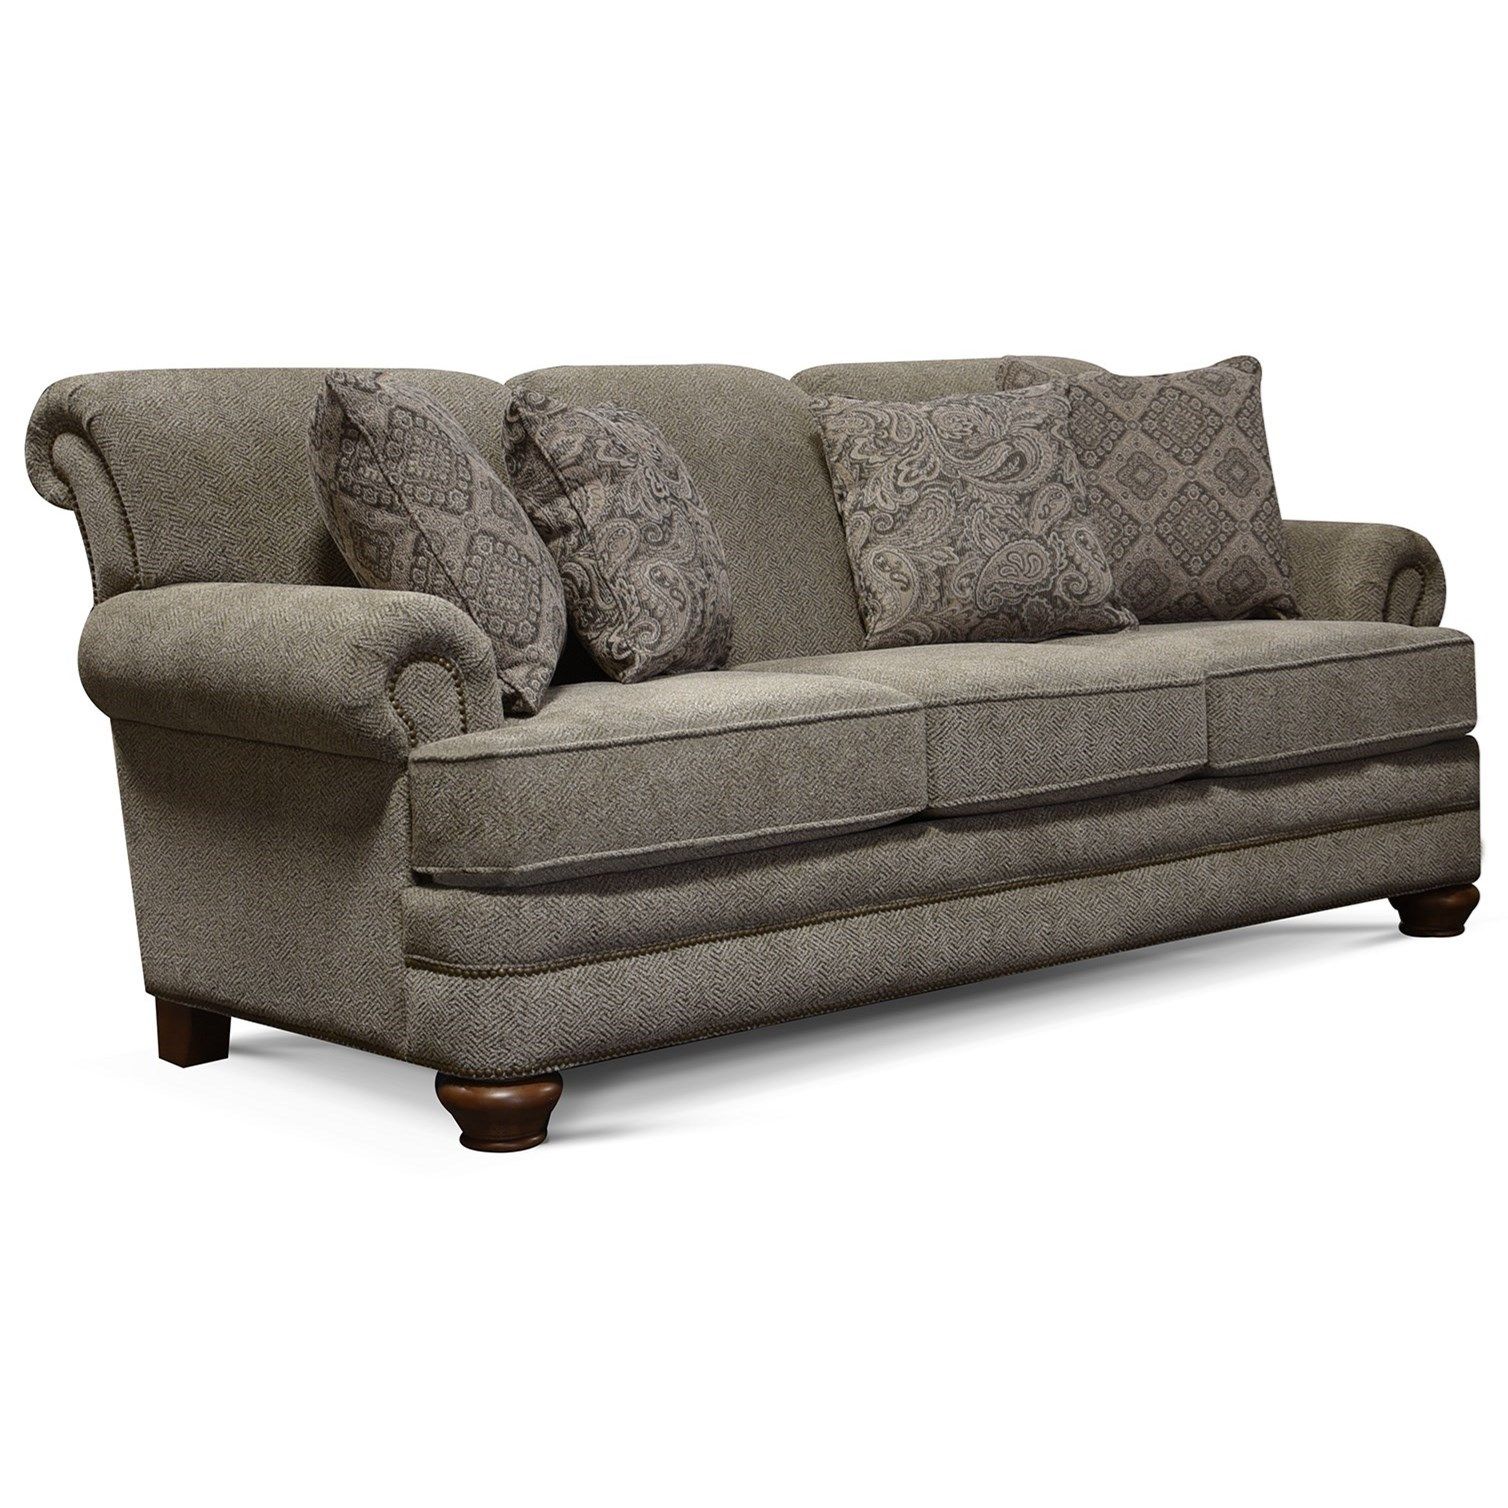 England 5q00/n Series Traditional Sofa With Nailhead Trim | Superstore |  Uph – Stationary Sofas Pertaining To Sofas With Nailhead Trim (Photo 5 of 15)